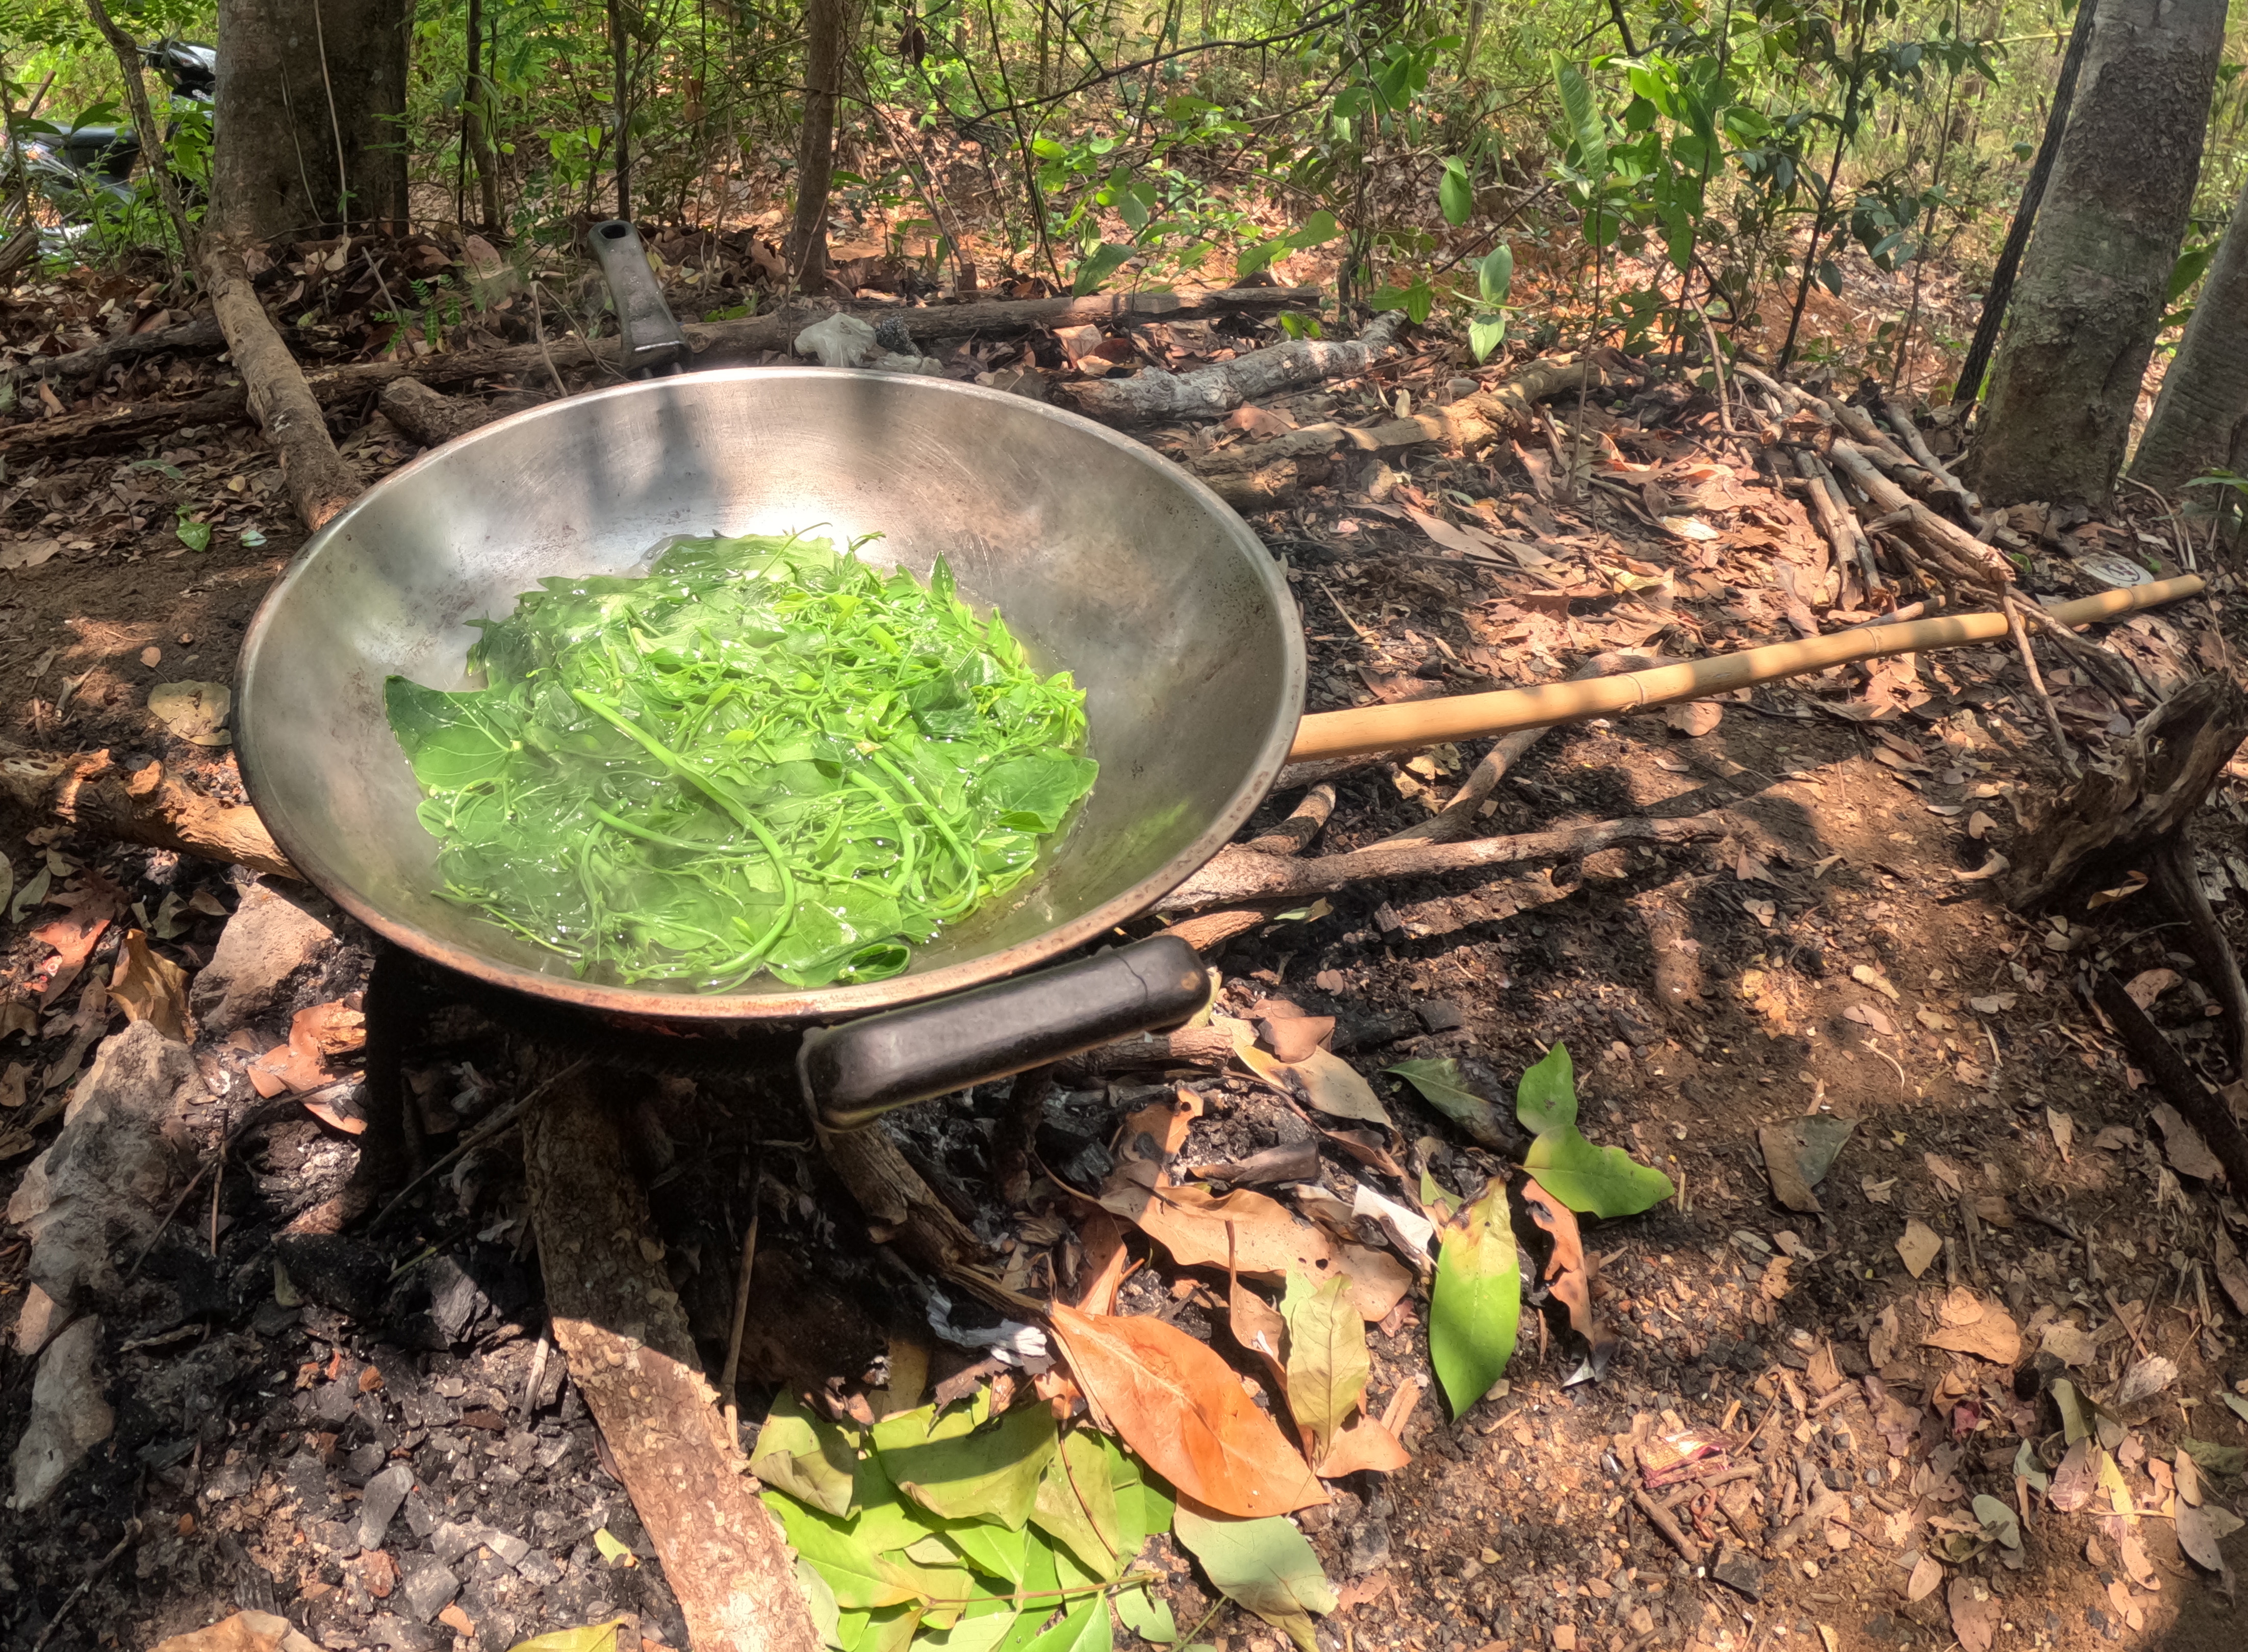 Edible plants from the community forest being cooked for lunch.